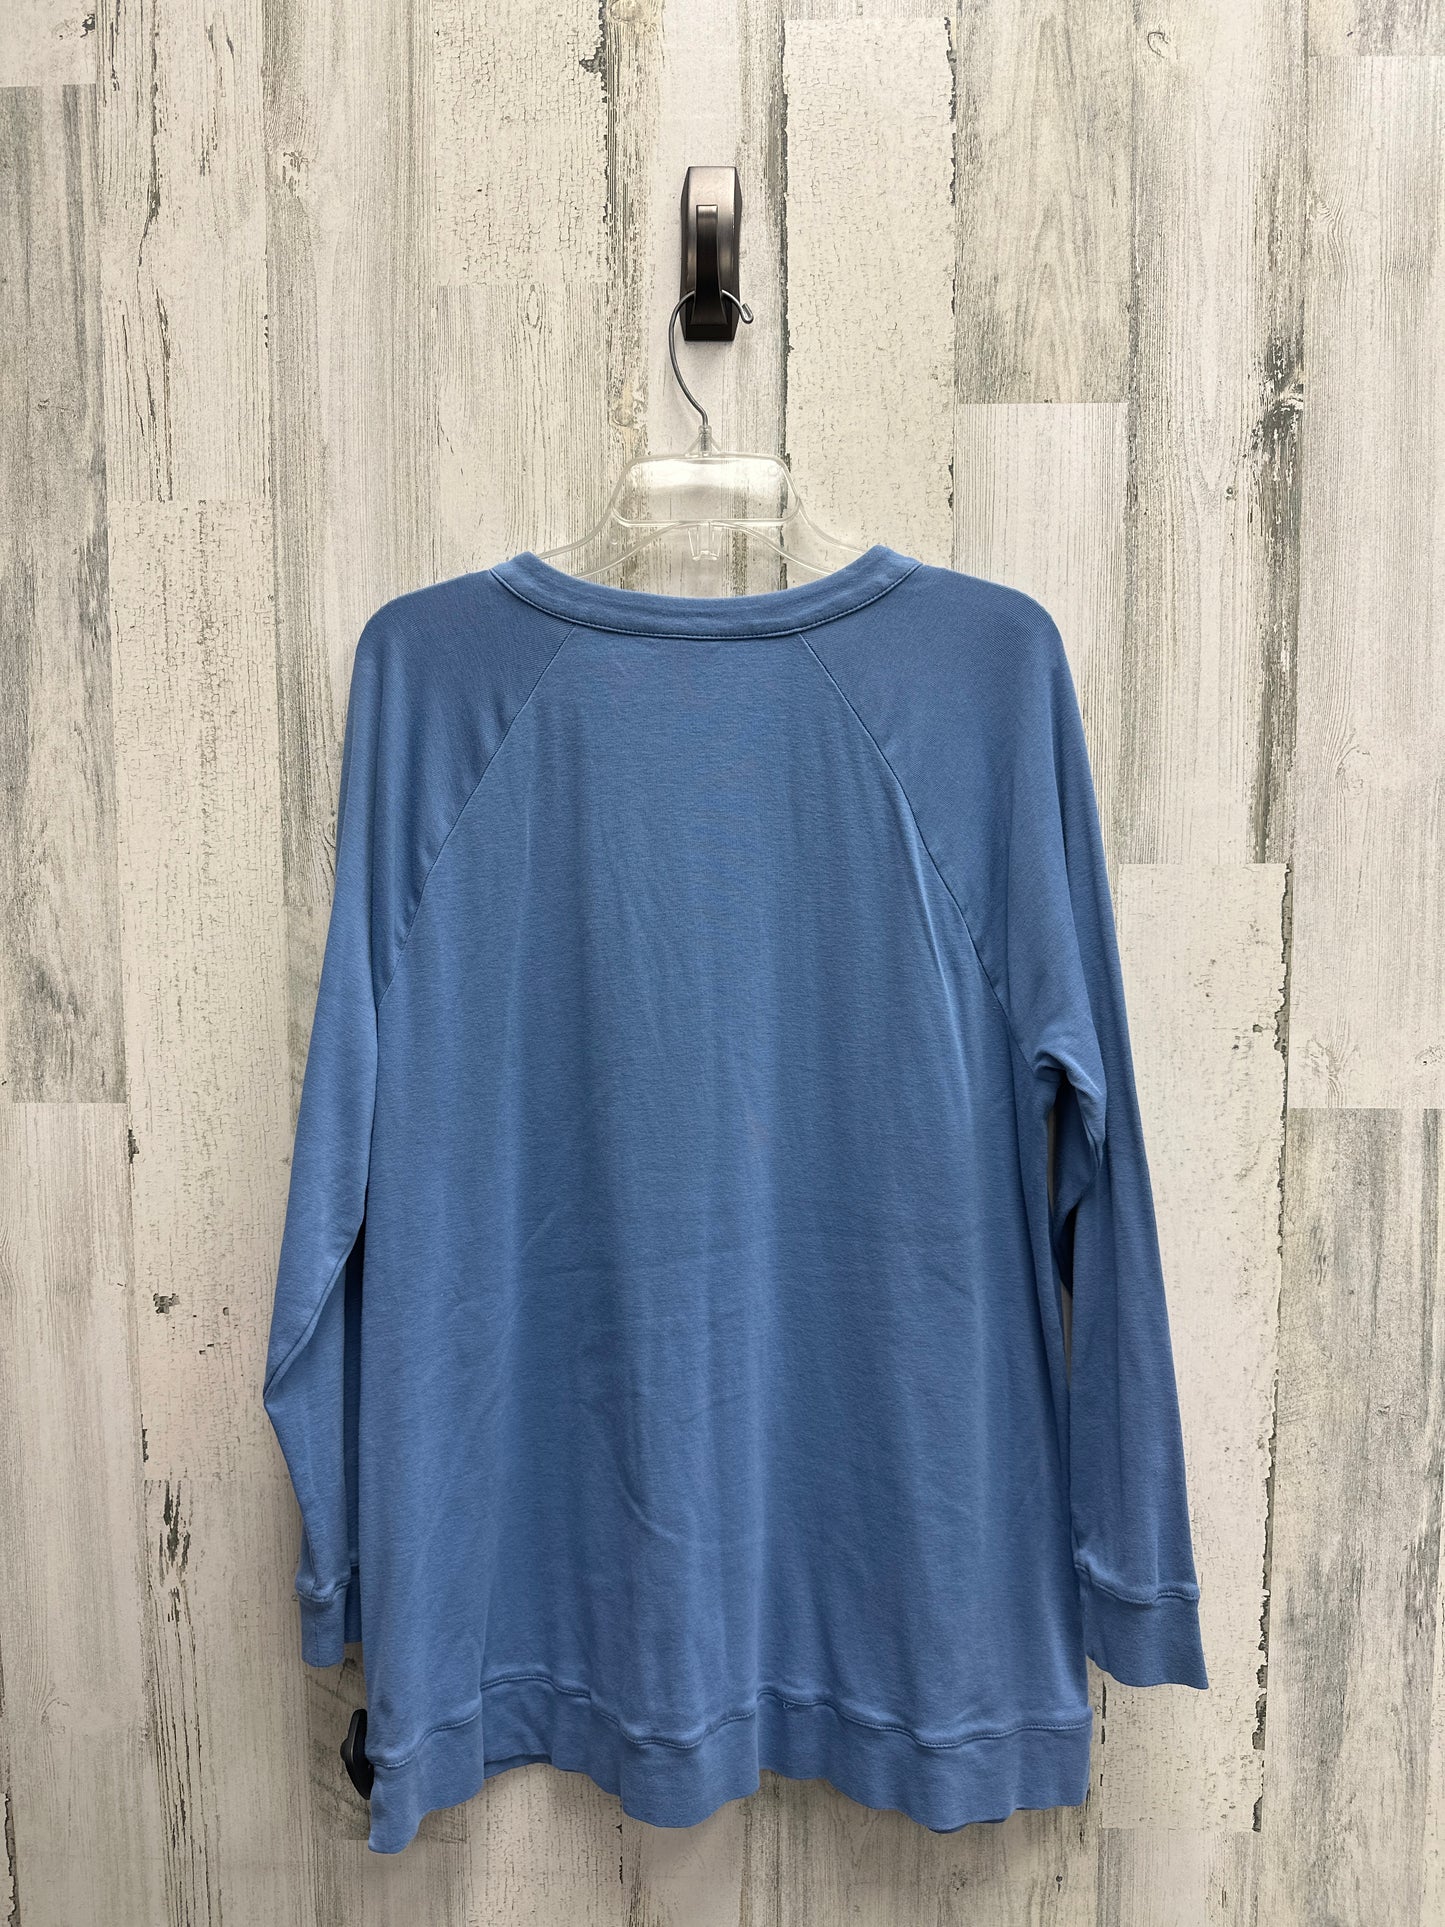 Top Long Sleeve By Chicos  Size: L